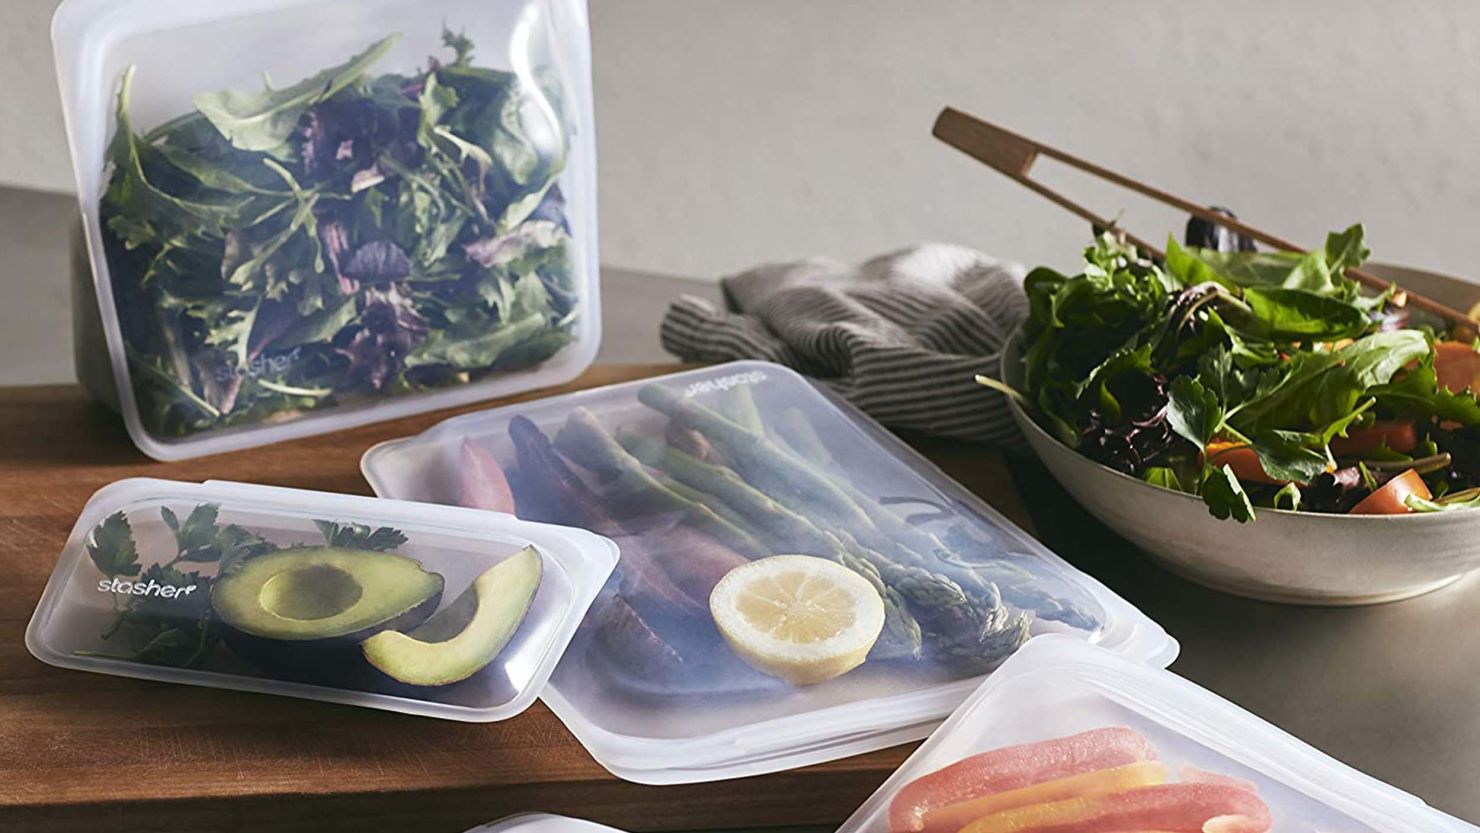 15 Smart Ways to Use an Ice Cube Tray for Meal Prepping and More